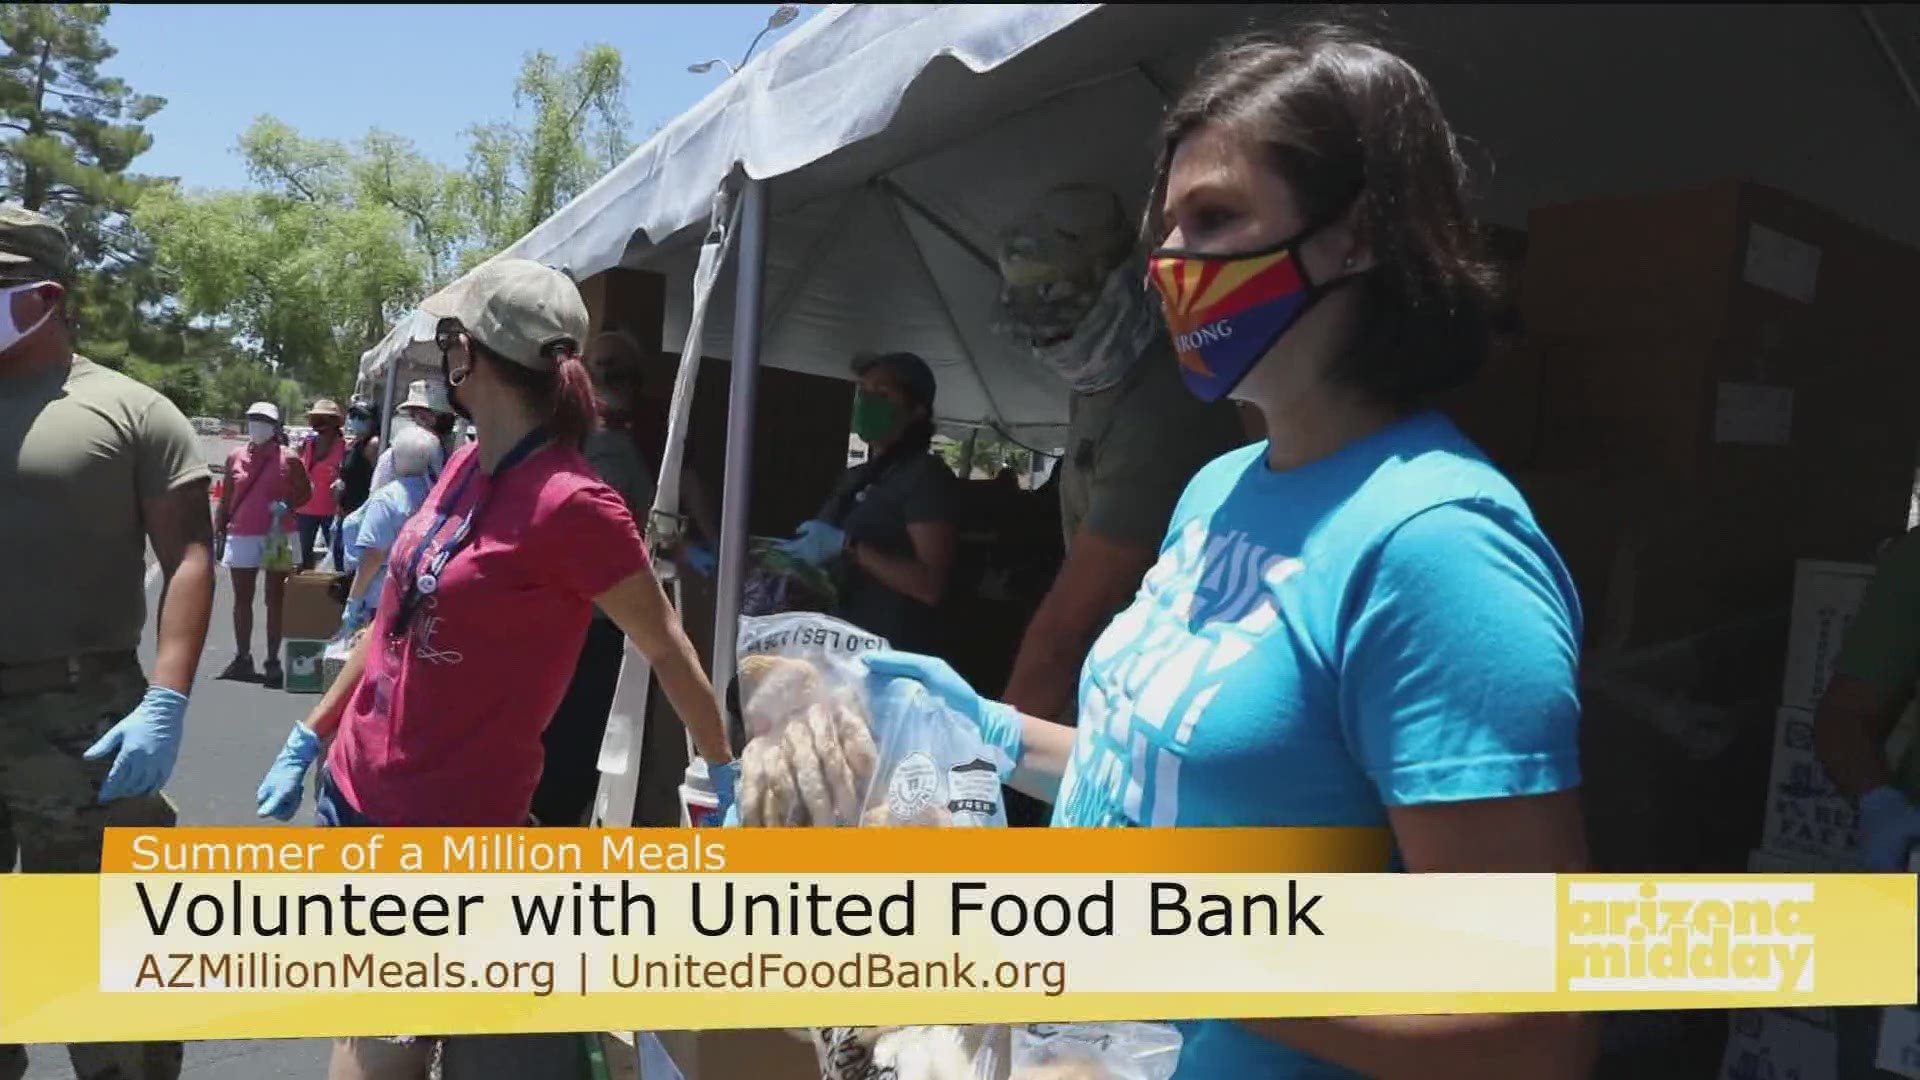 Jan talks with Sabine Thompson, a volunteer with United Food Bank, and why she's choosing to make a difference during such a needed time